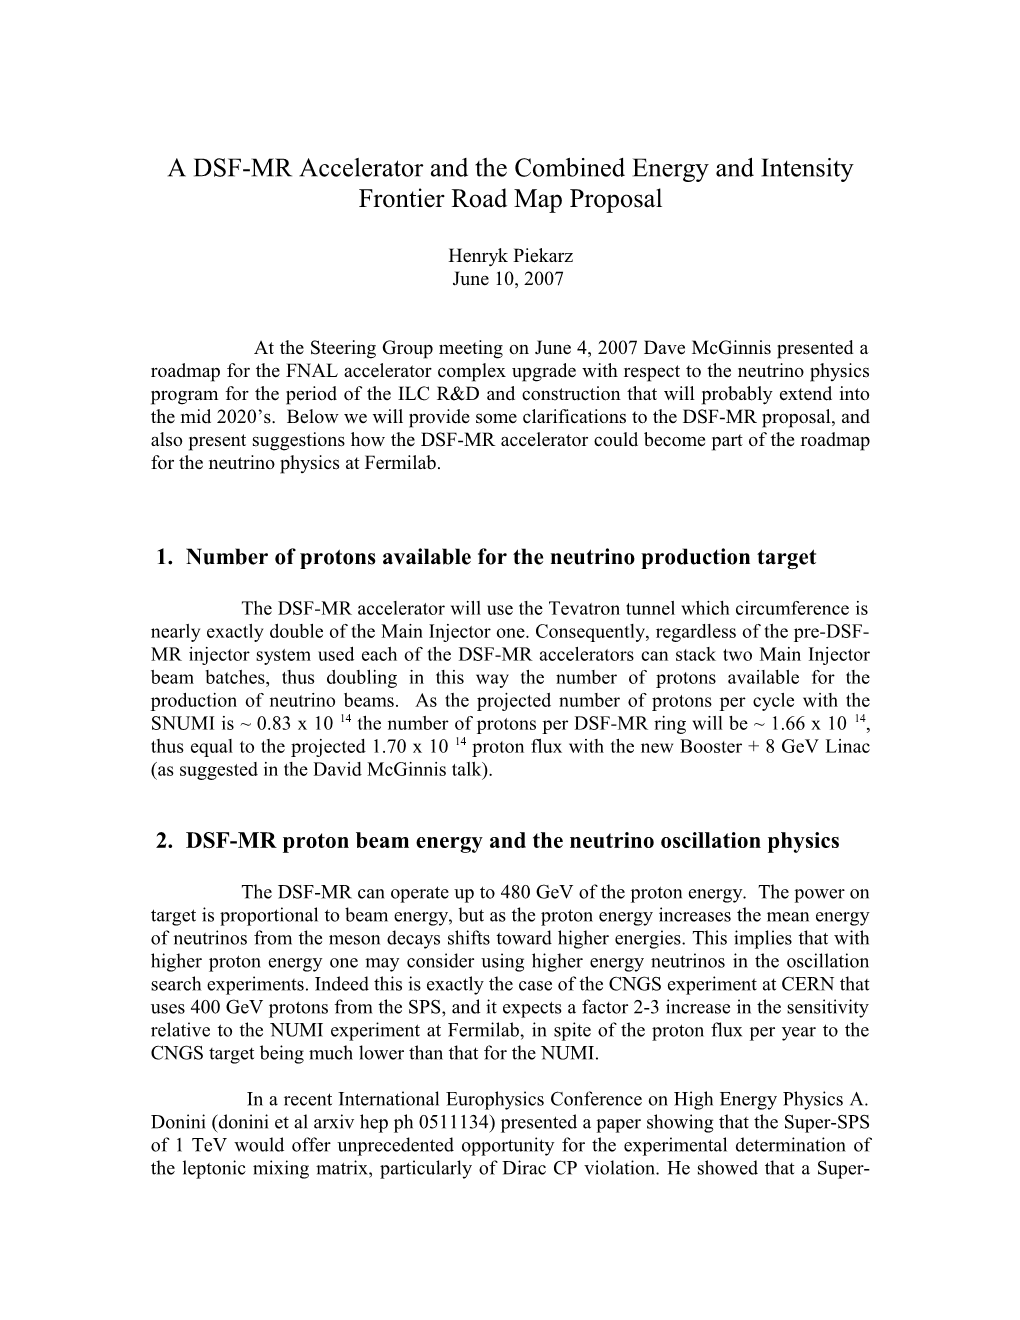 A DSF-MR Accelerator and the Combined Energy and Intensity Frontier Road Map Proposal